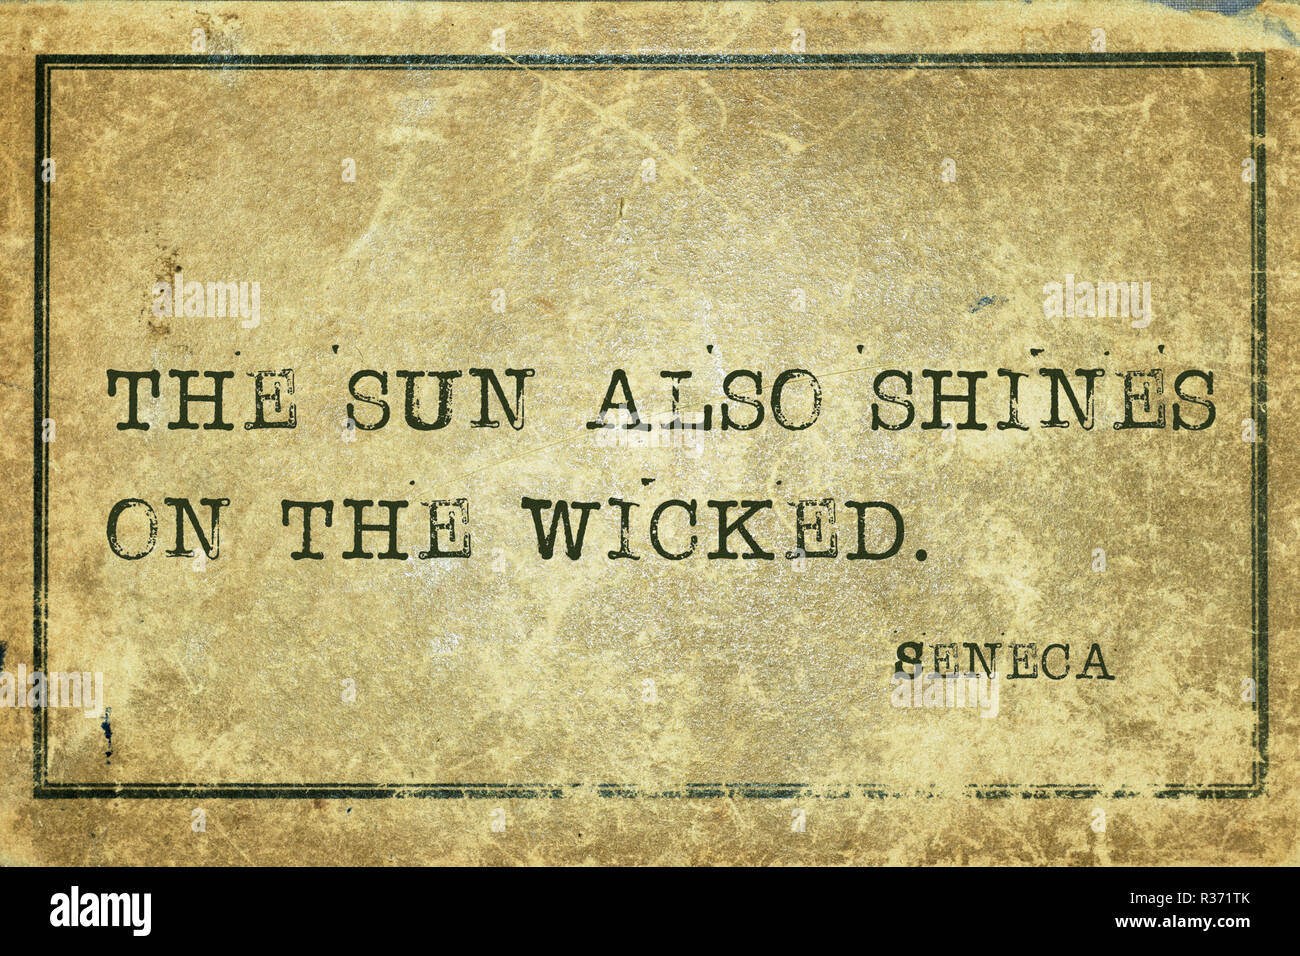 The sun also shines on the wicked - ancient Roman philosopher Seneca quote printed on grunge vintage cardboard Stock Photo